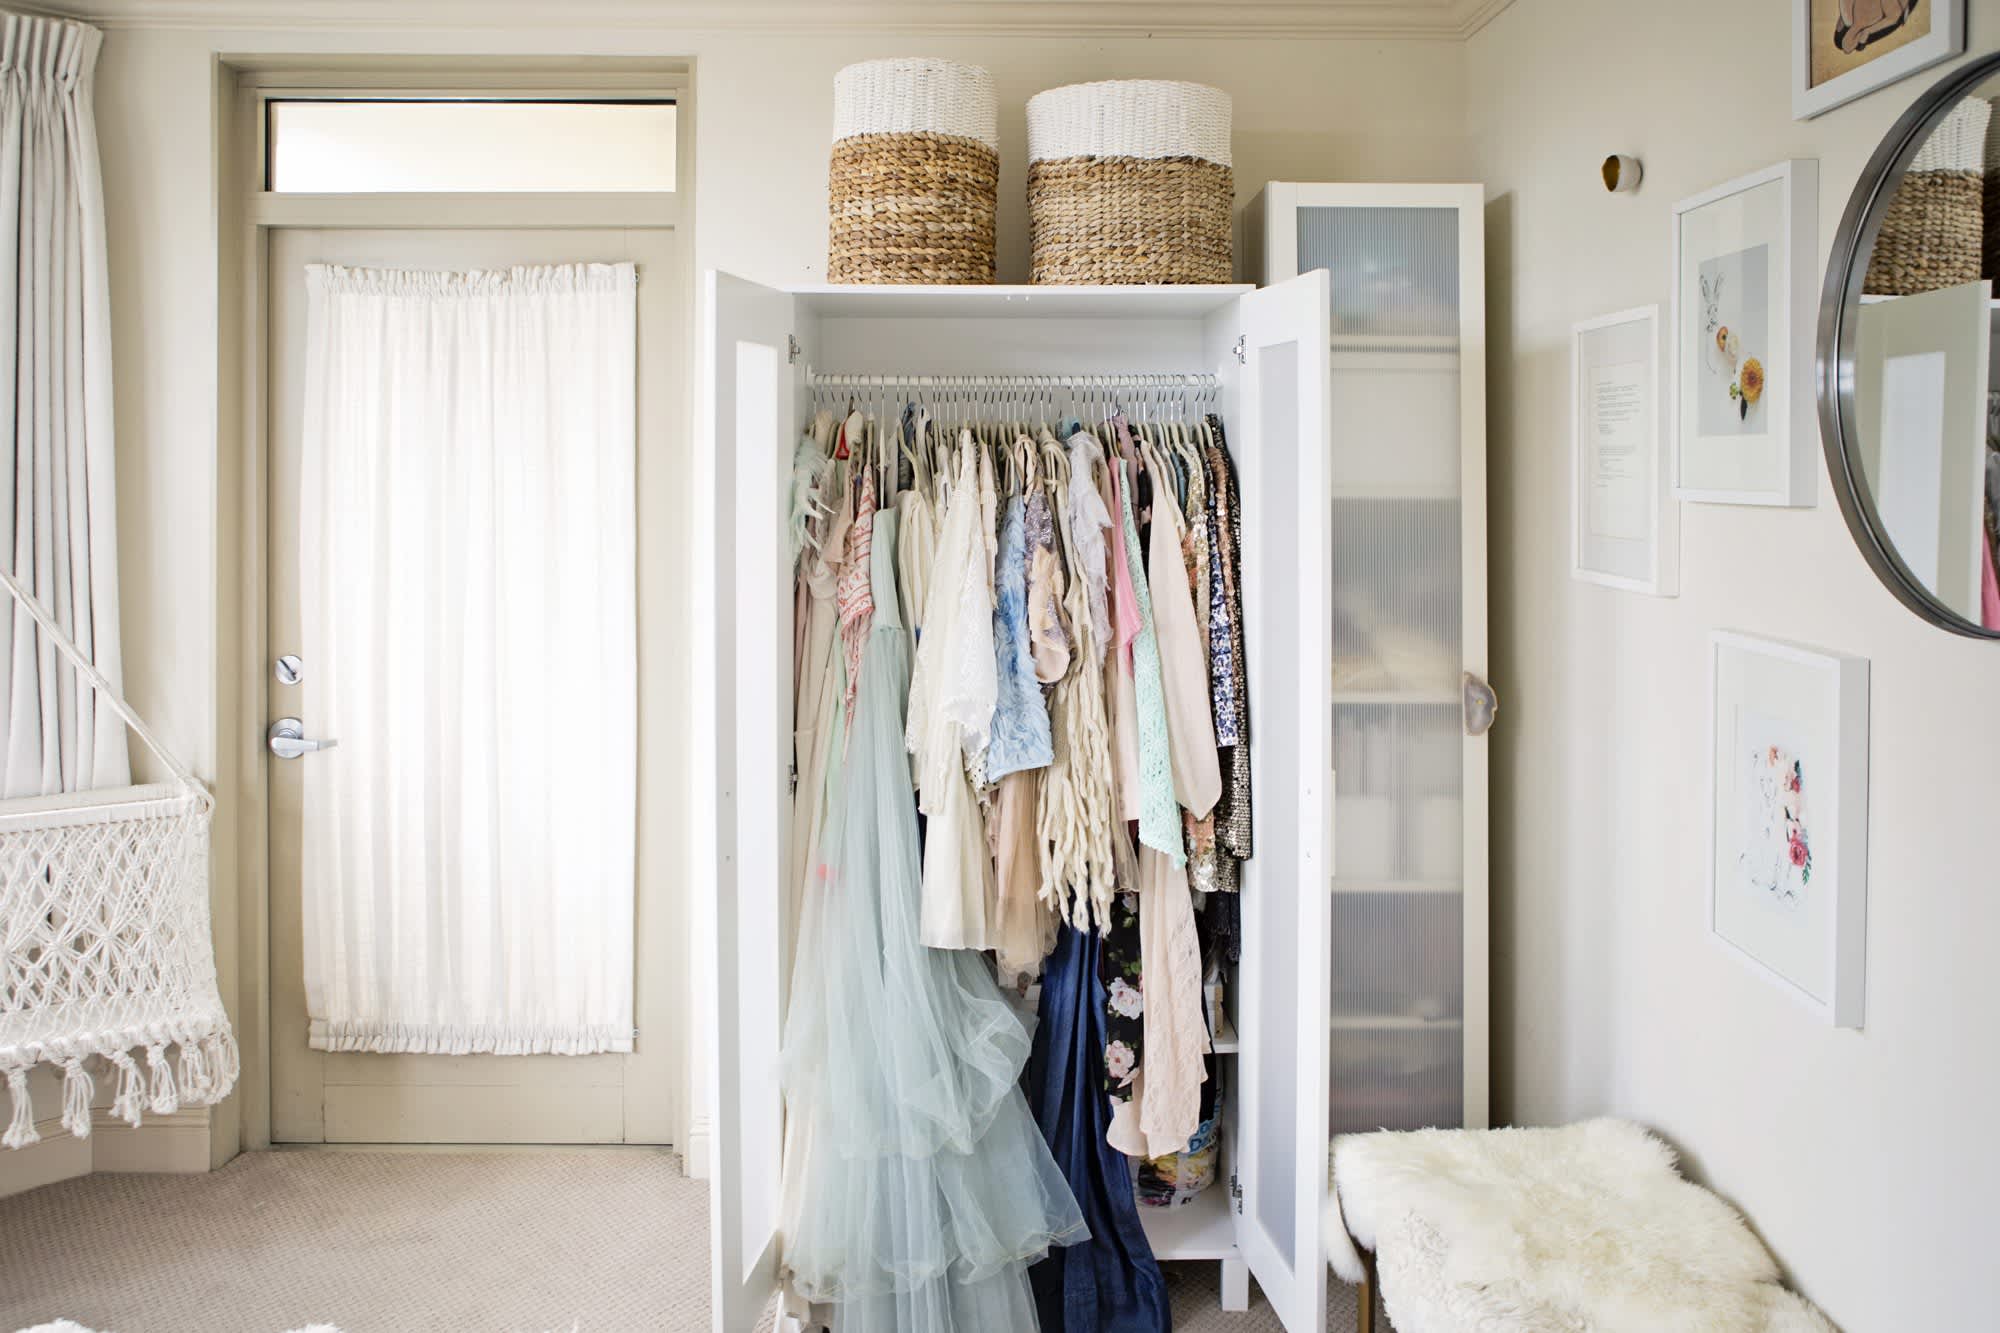 How To Organize a Closet in a Non-Permanent Way (No Drilling and